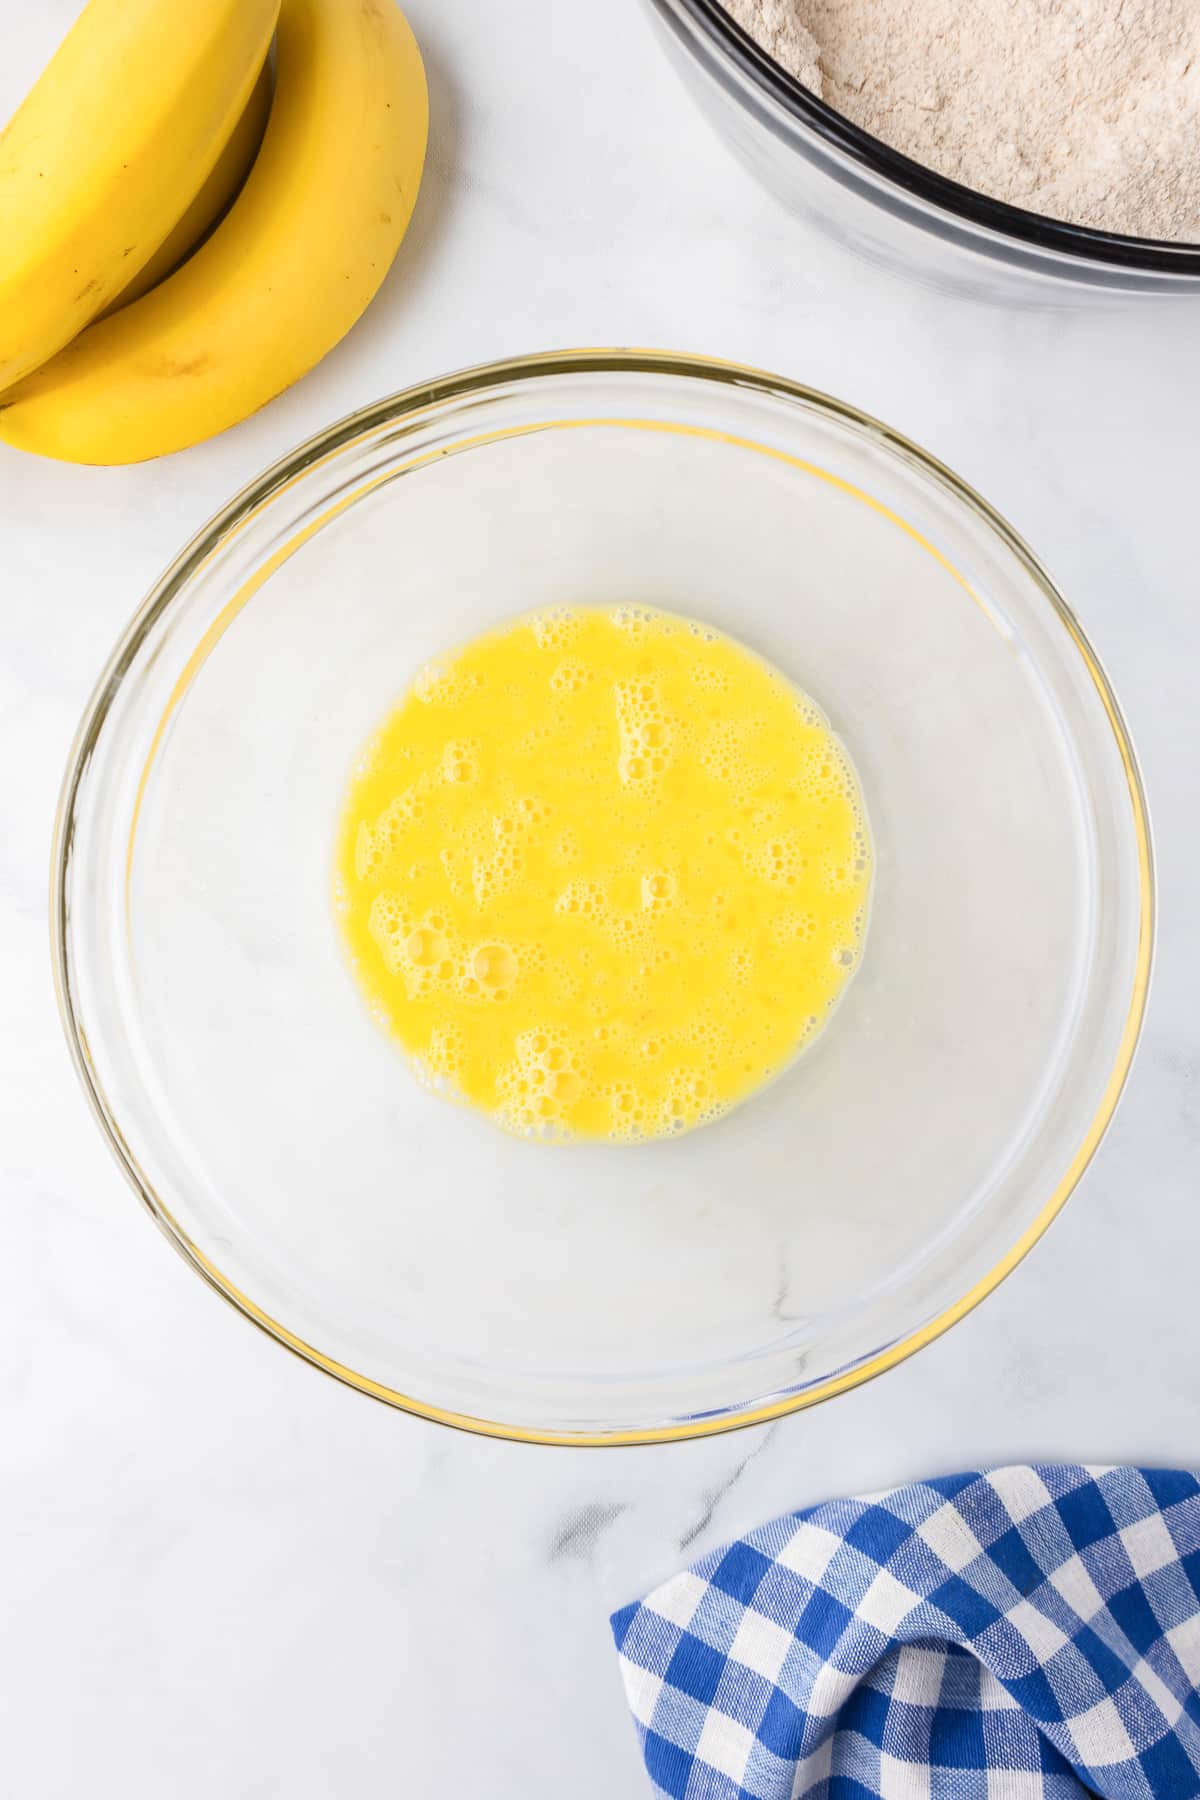 Whisked eggs in a clear glass bowl on a kitchen counter with bananas and ingredients in the background.